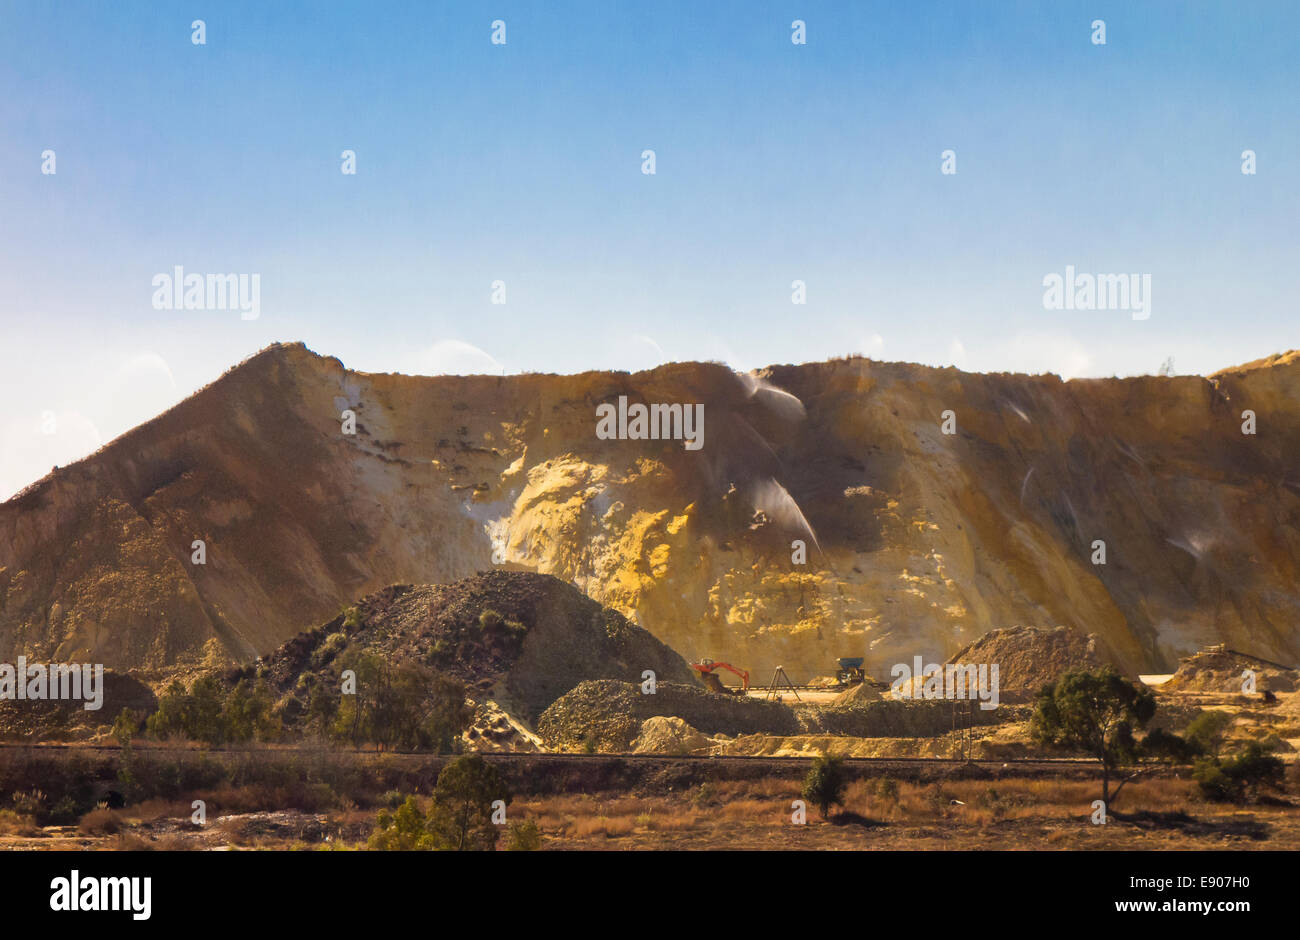 JOHANNESBURG, SOUTH AFRICA - Reprocessing gold mine tailings. Stock Photo